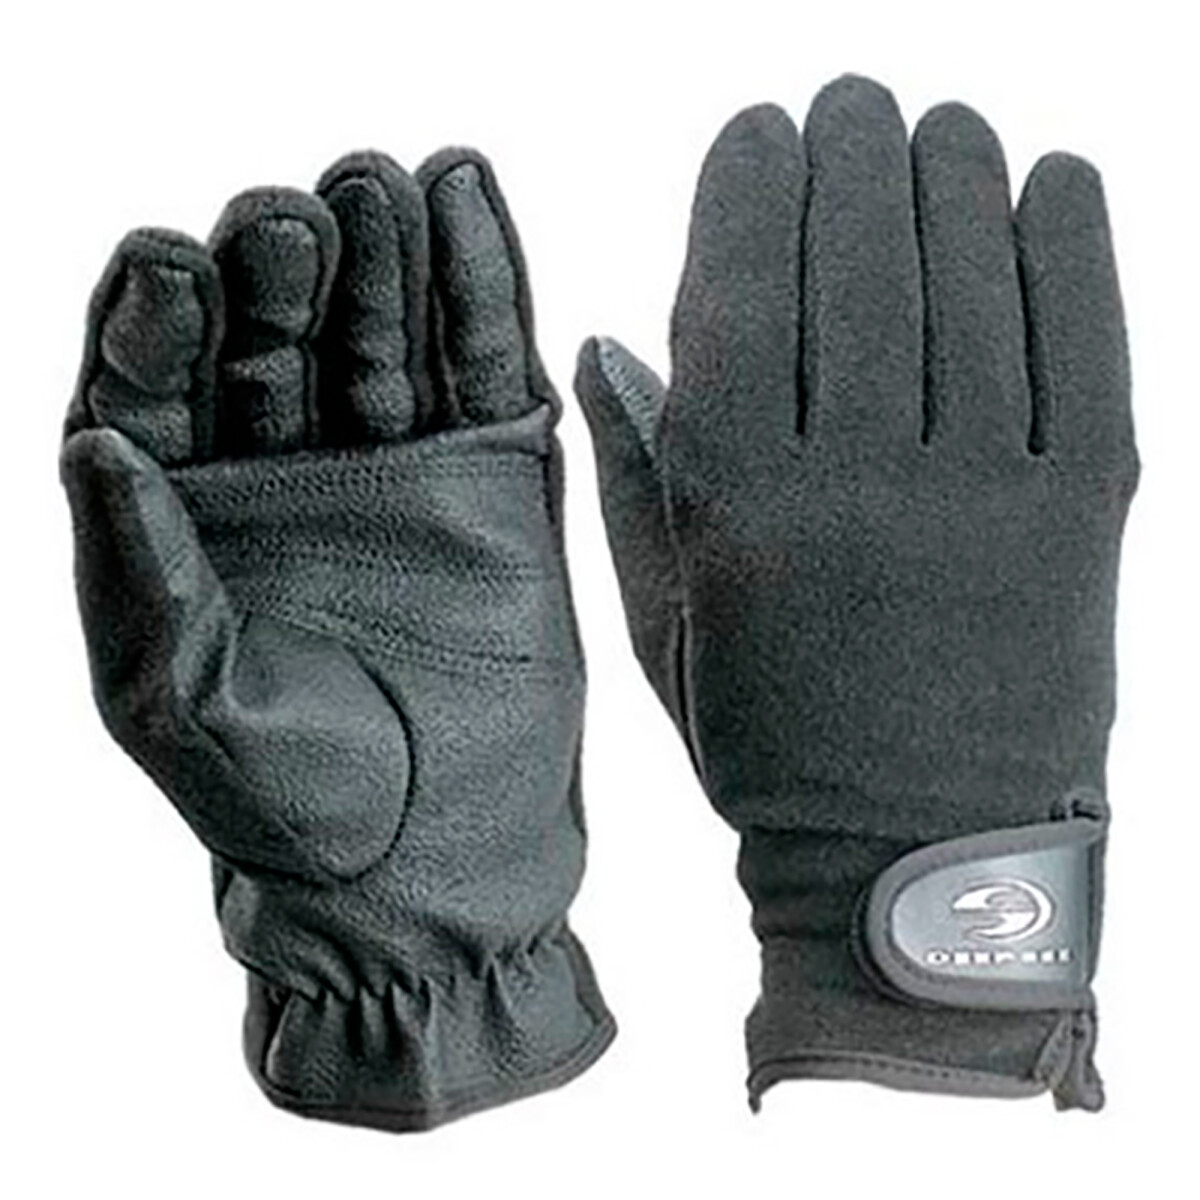 Deep See - Guantes Diving D321013 - M. - 001 